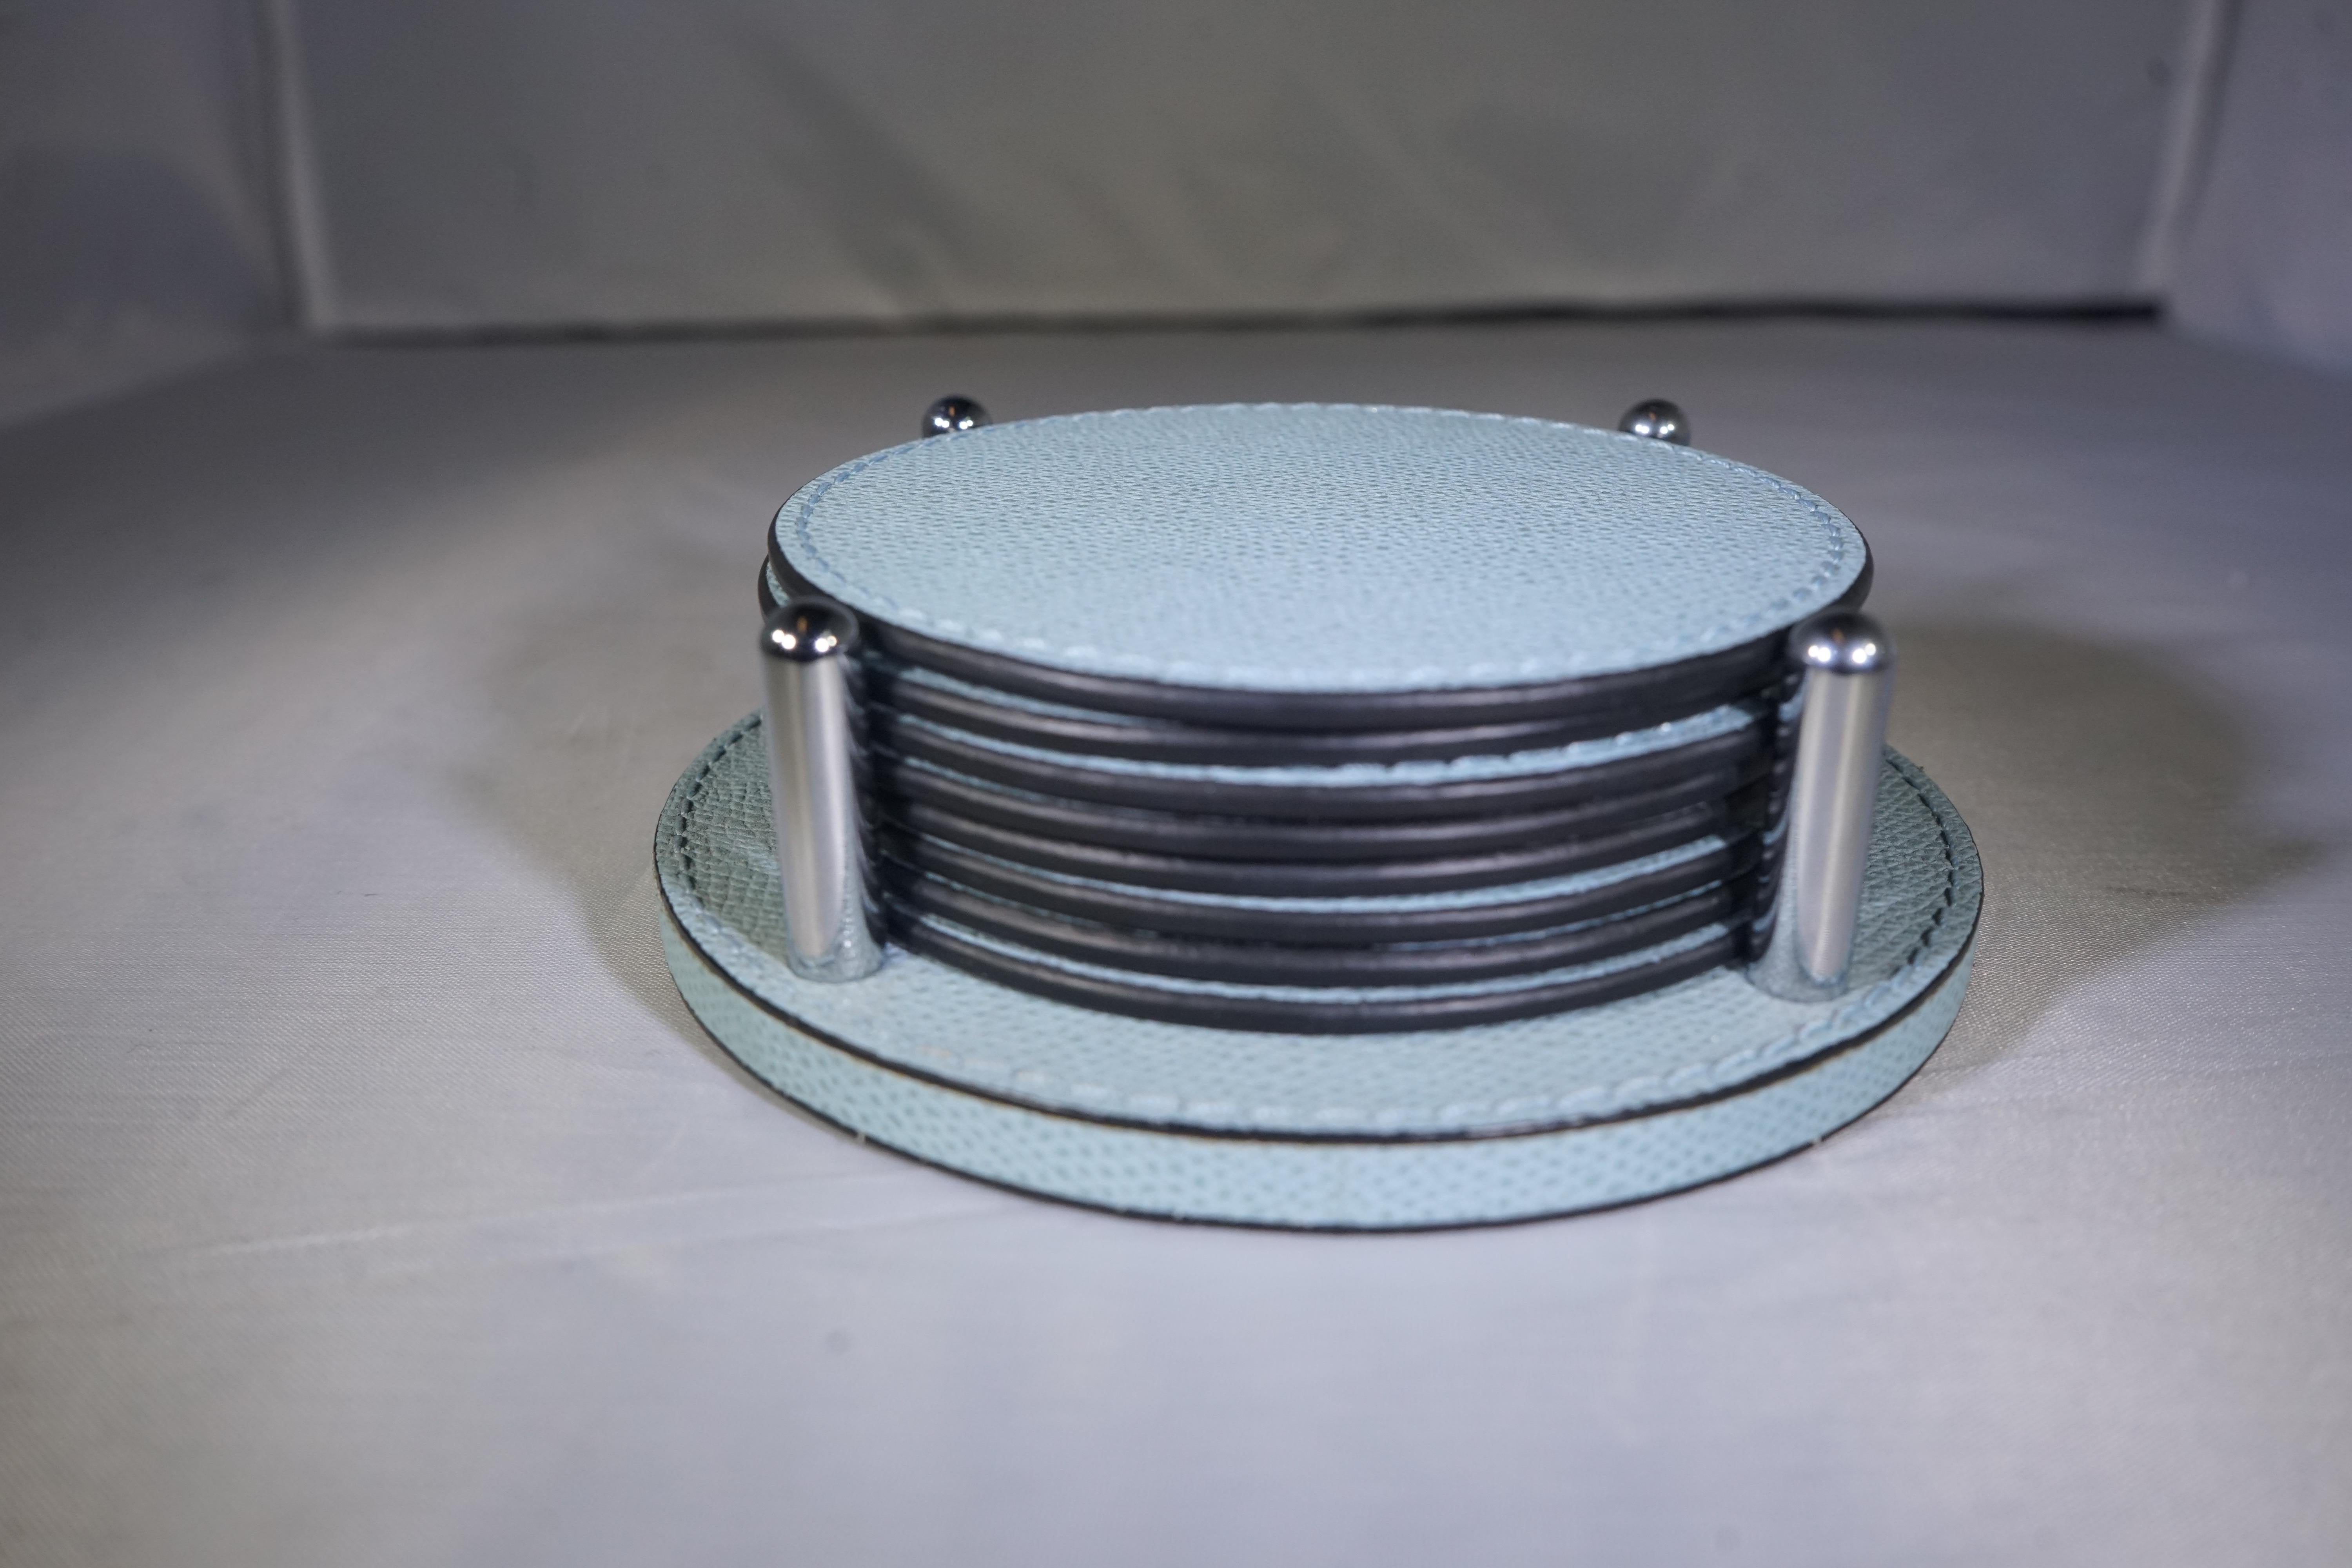 Contemporary Italian sky blue colored leather coaster set with 8 coasters and holder.